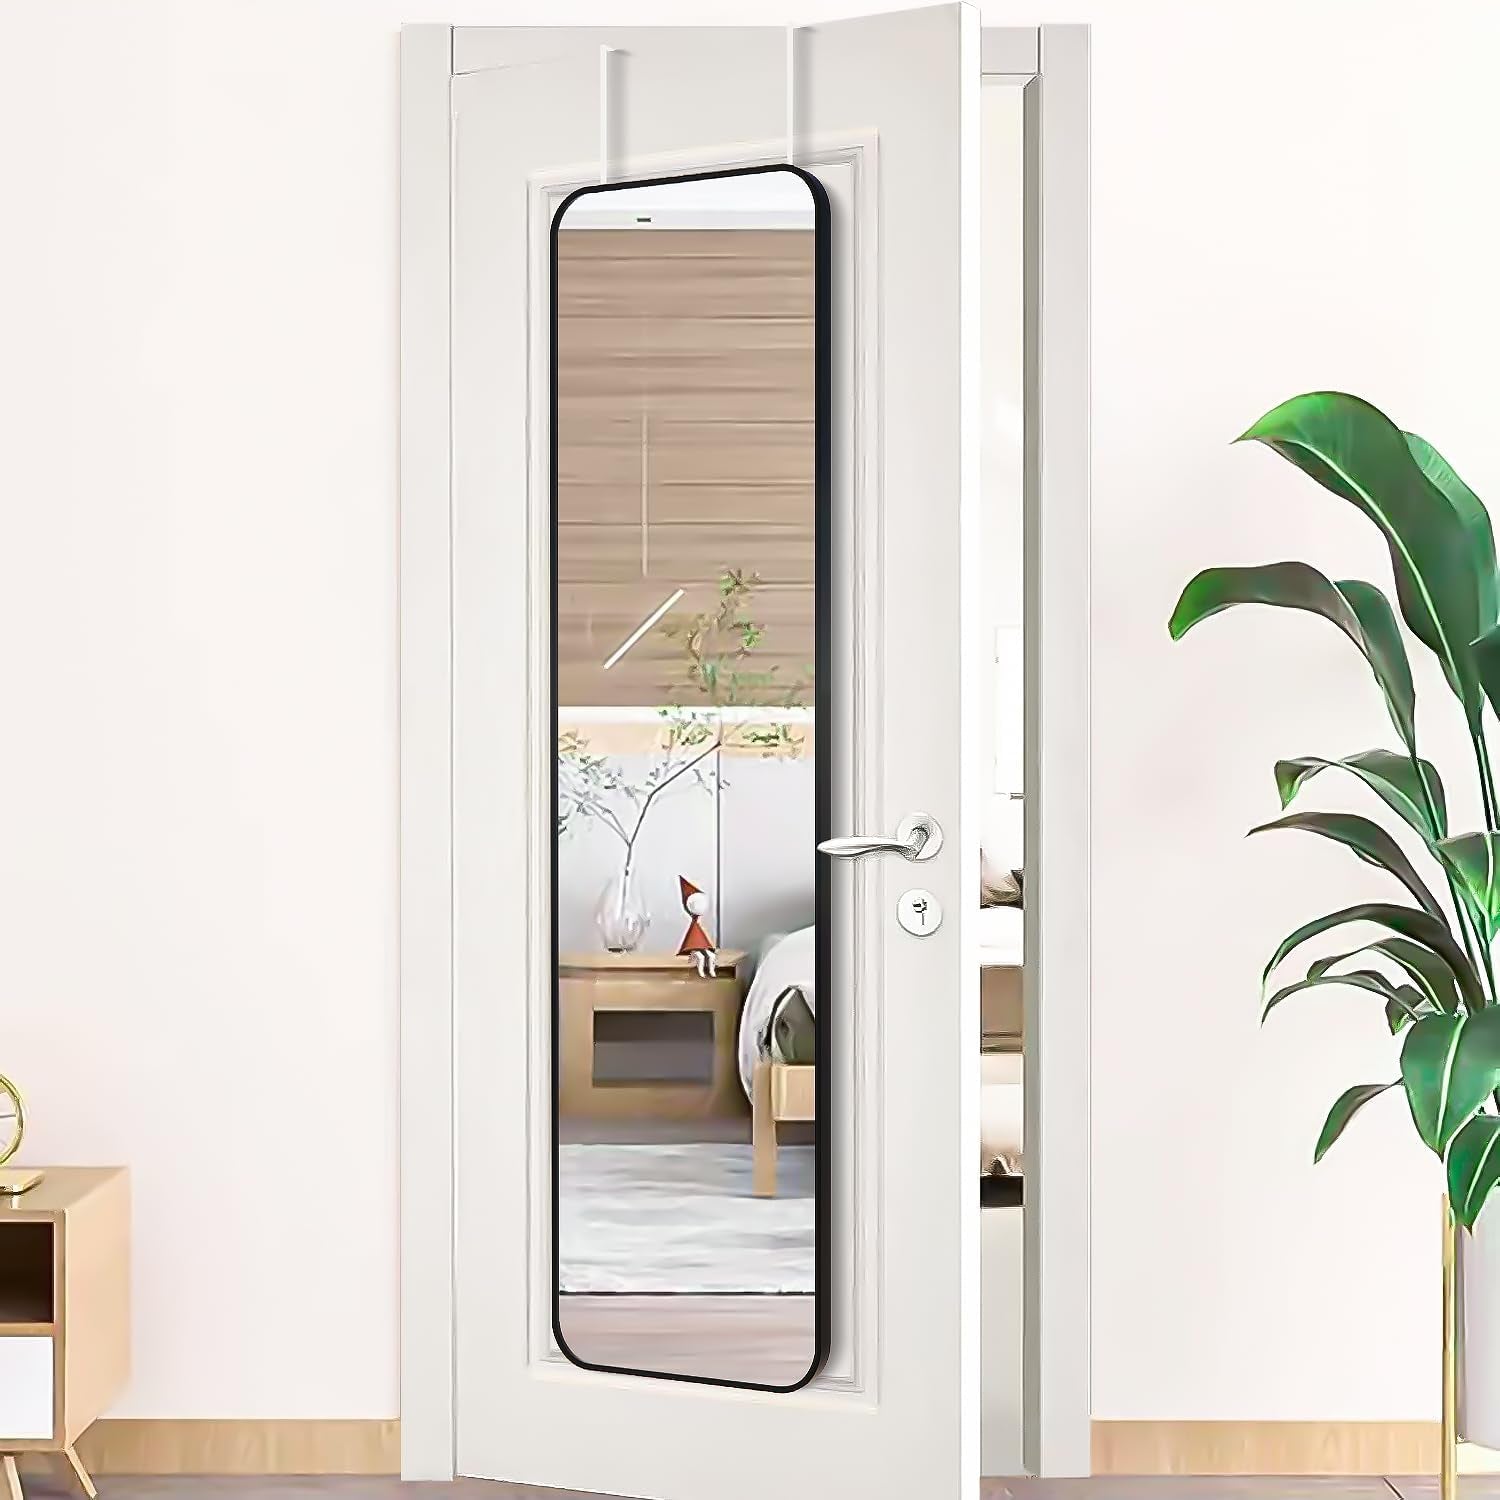 47X14 Mirror Rectangle Full Body Length Door Hanging Wall Mounted Metal Frame Dressing Make-Up Mirrors for Entryway Bedroom Bathroom Living Room 47 14 Inch Black